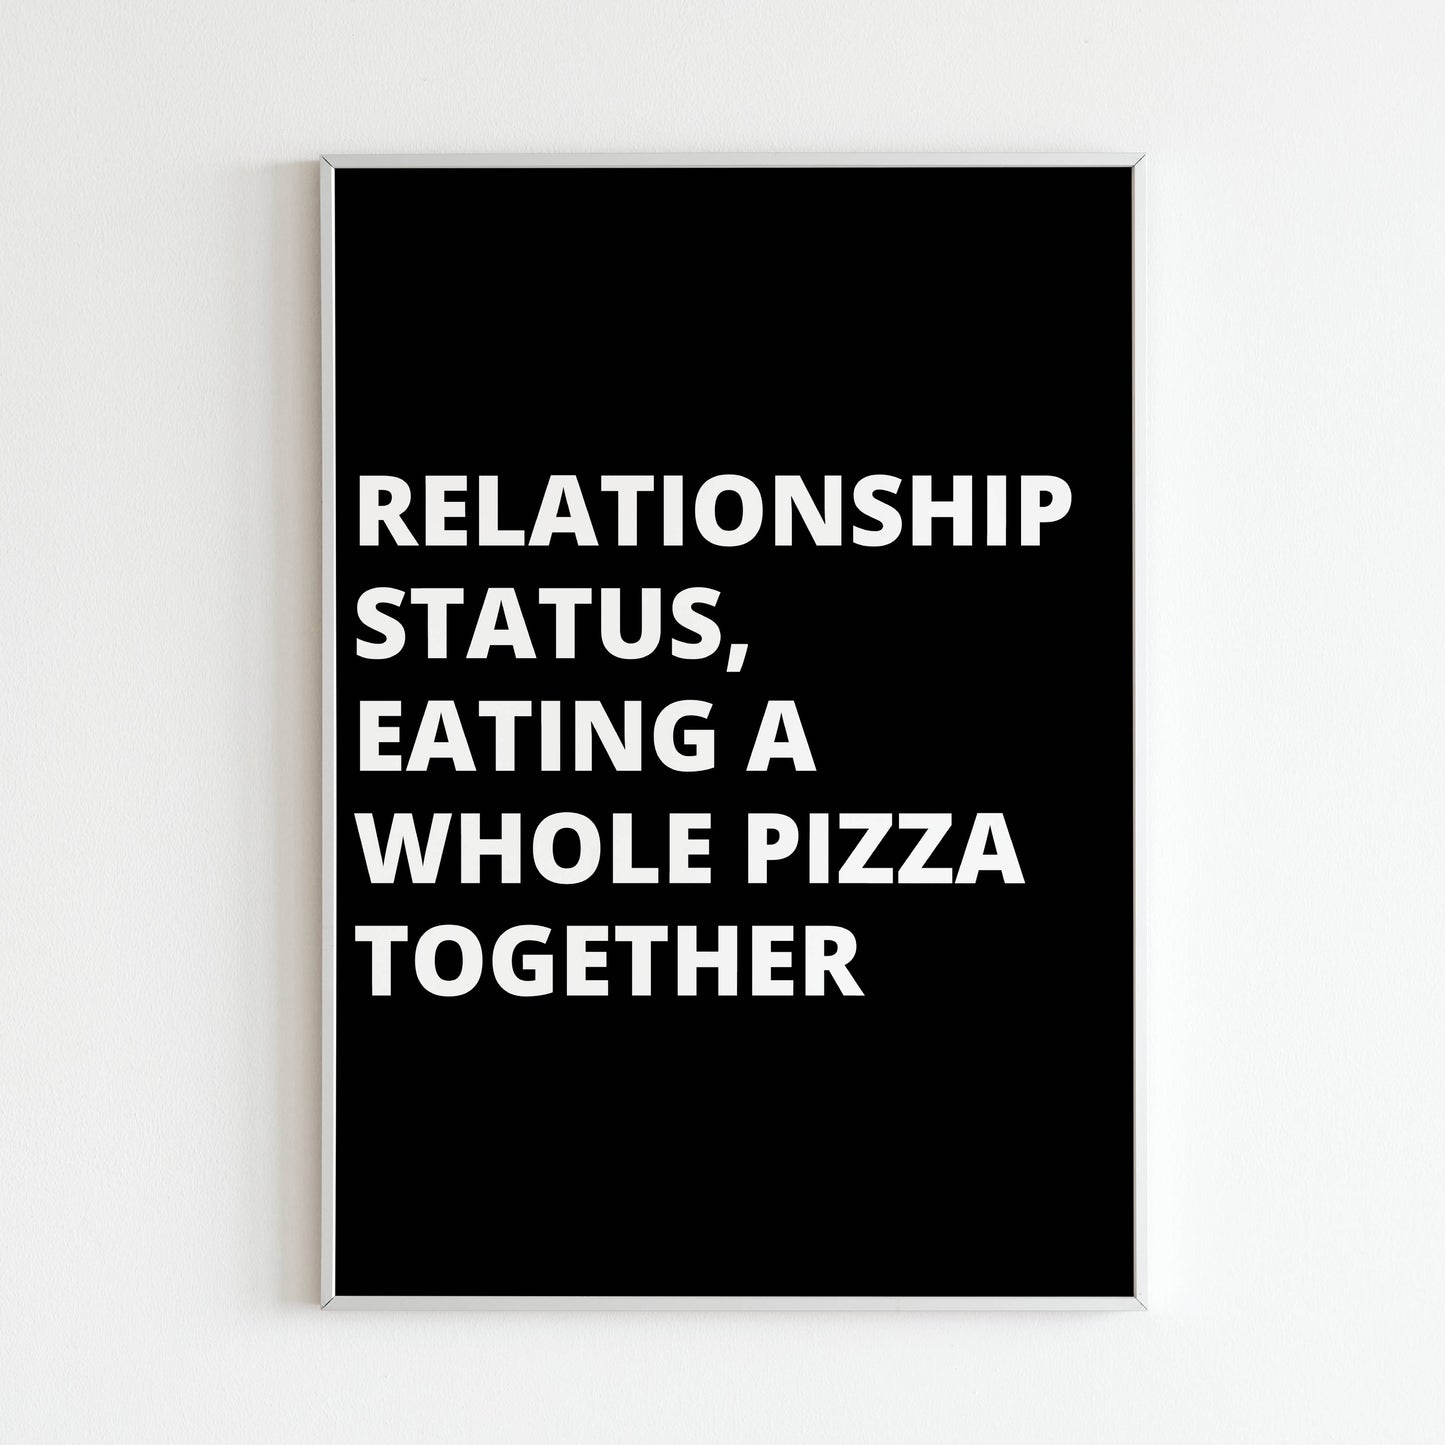 Downloadable "Relationship status eating a whole pizza together" art print, express the joys of shared meals and connection with a touch of humor.